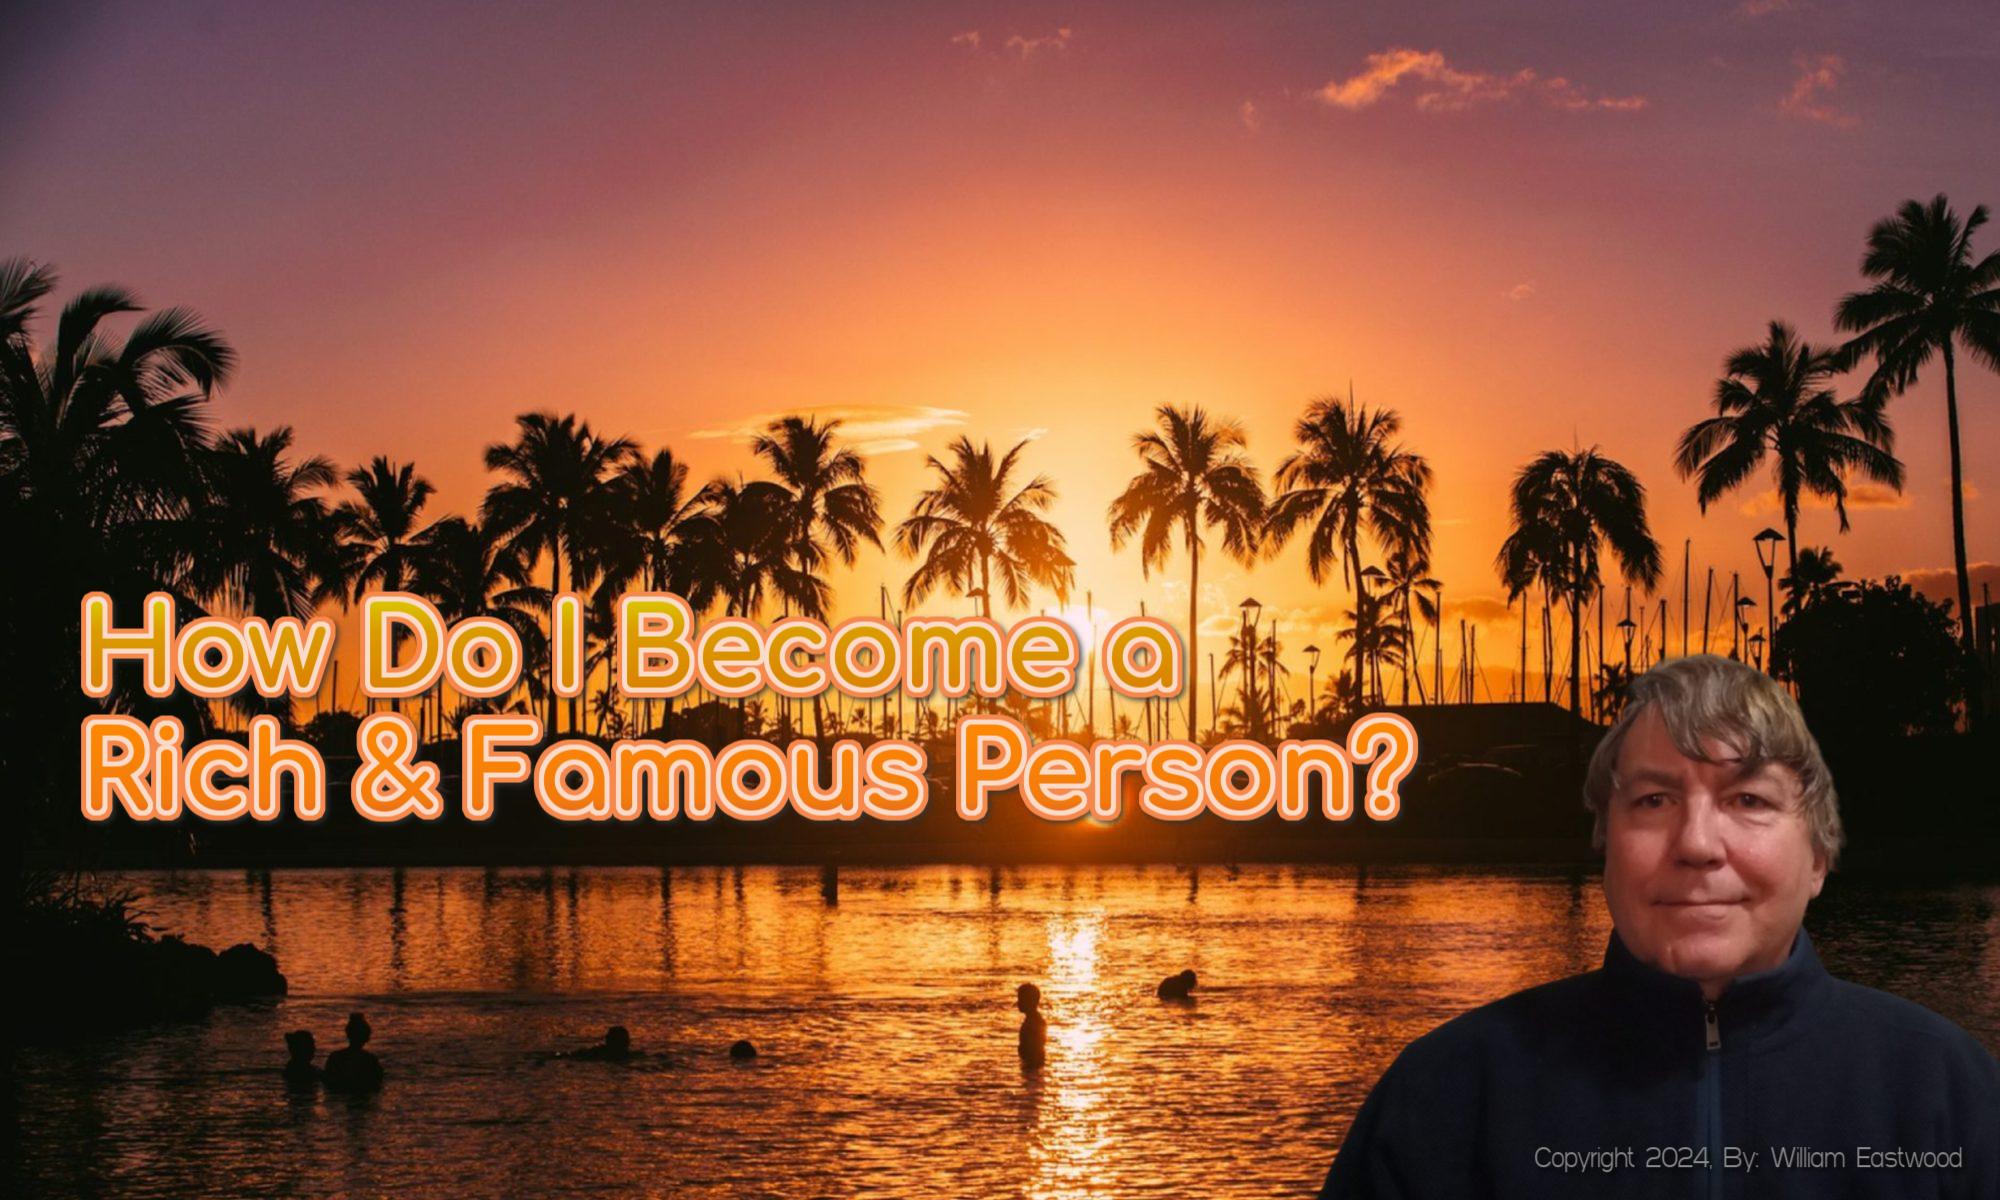 MANIFEST MONEY, FAME & FORTUNE! How to Become a Rich & Famous Person